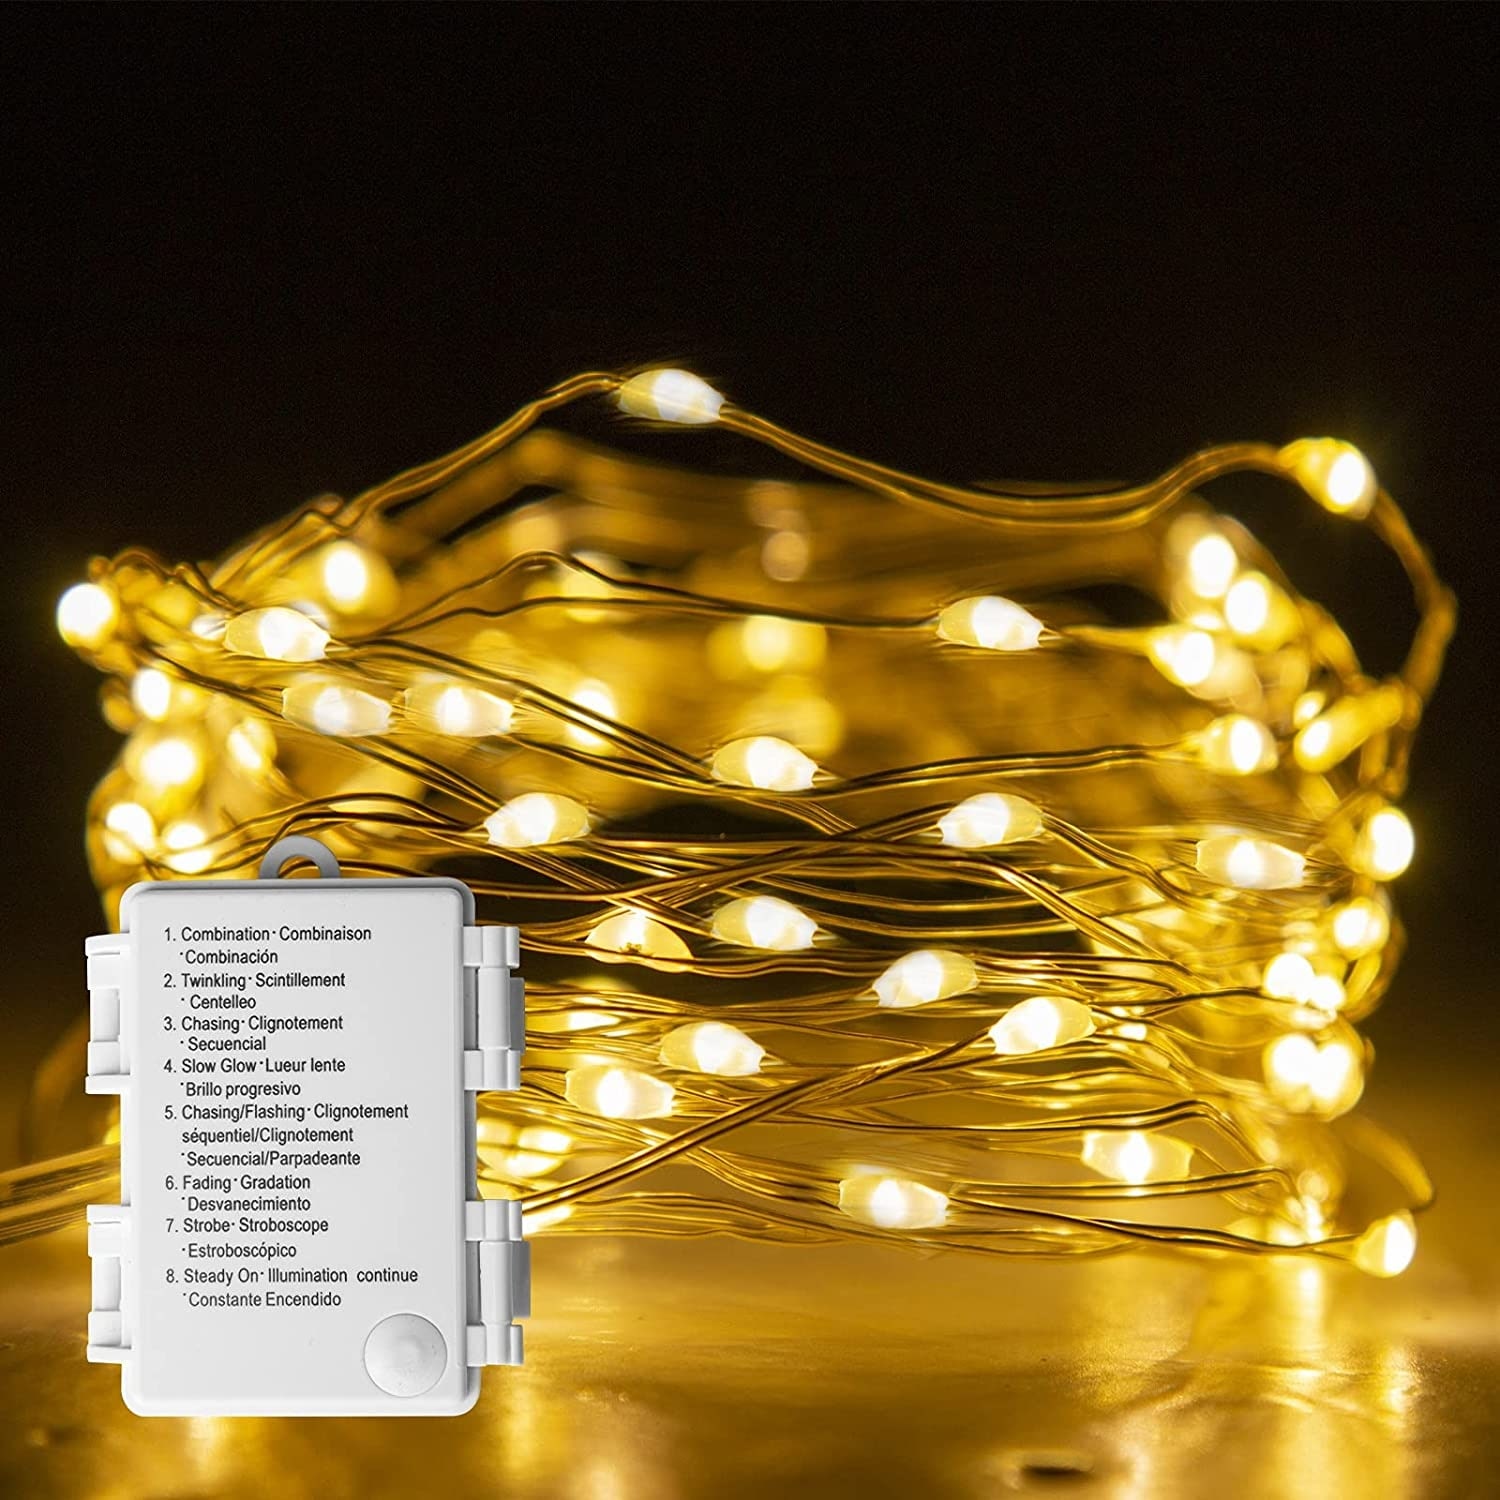 https://ak1.ostkcdn.com/images/products/is/images/direct/a34b030c05a2c1e6da649ce348bc2cd5dcf298cf/Fairy-Light-Battery-Operated-with-8-Modes-50-LEDs-String-Lights.jpg